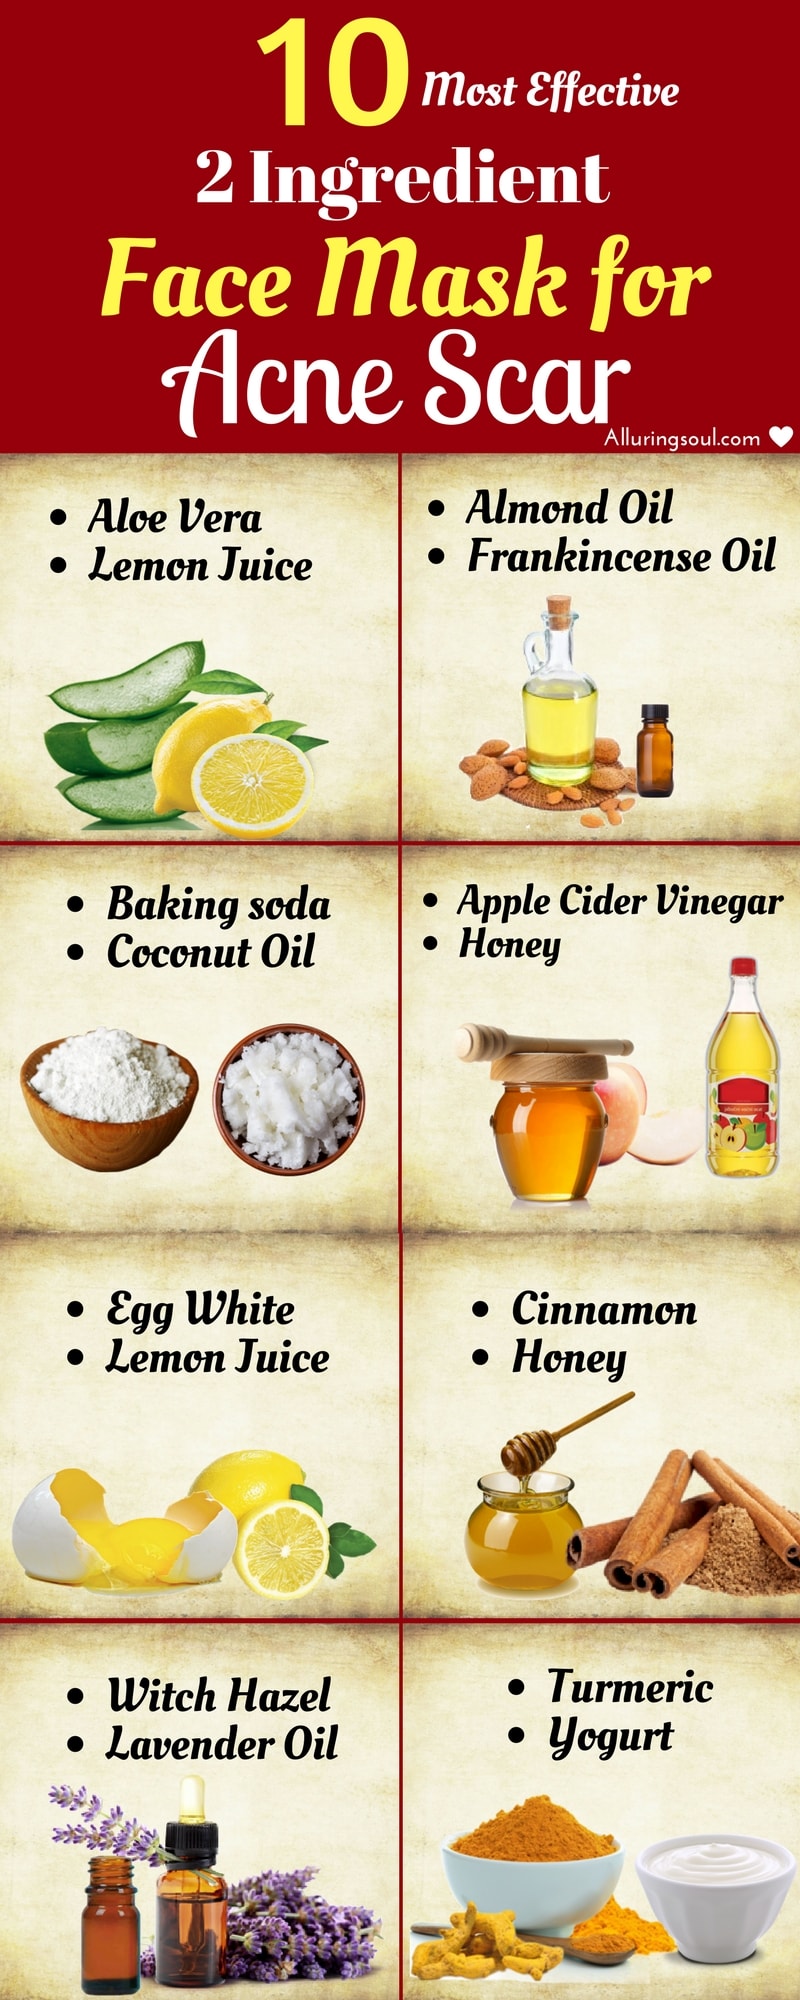 Face Mask Recipe For Acne Scars Image Of Food Recipe